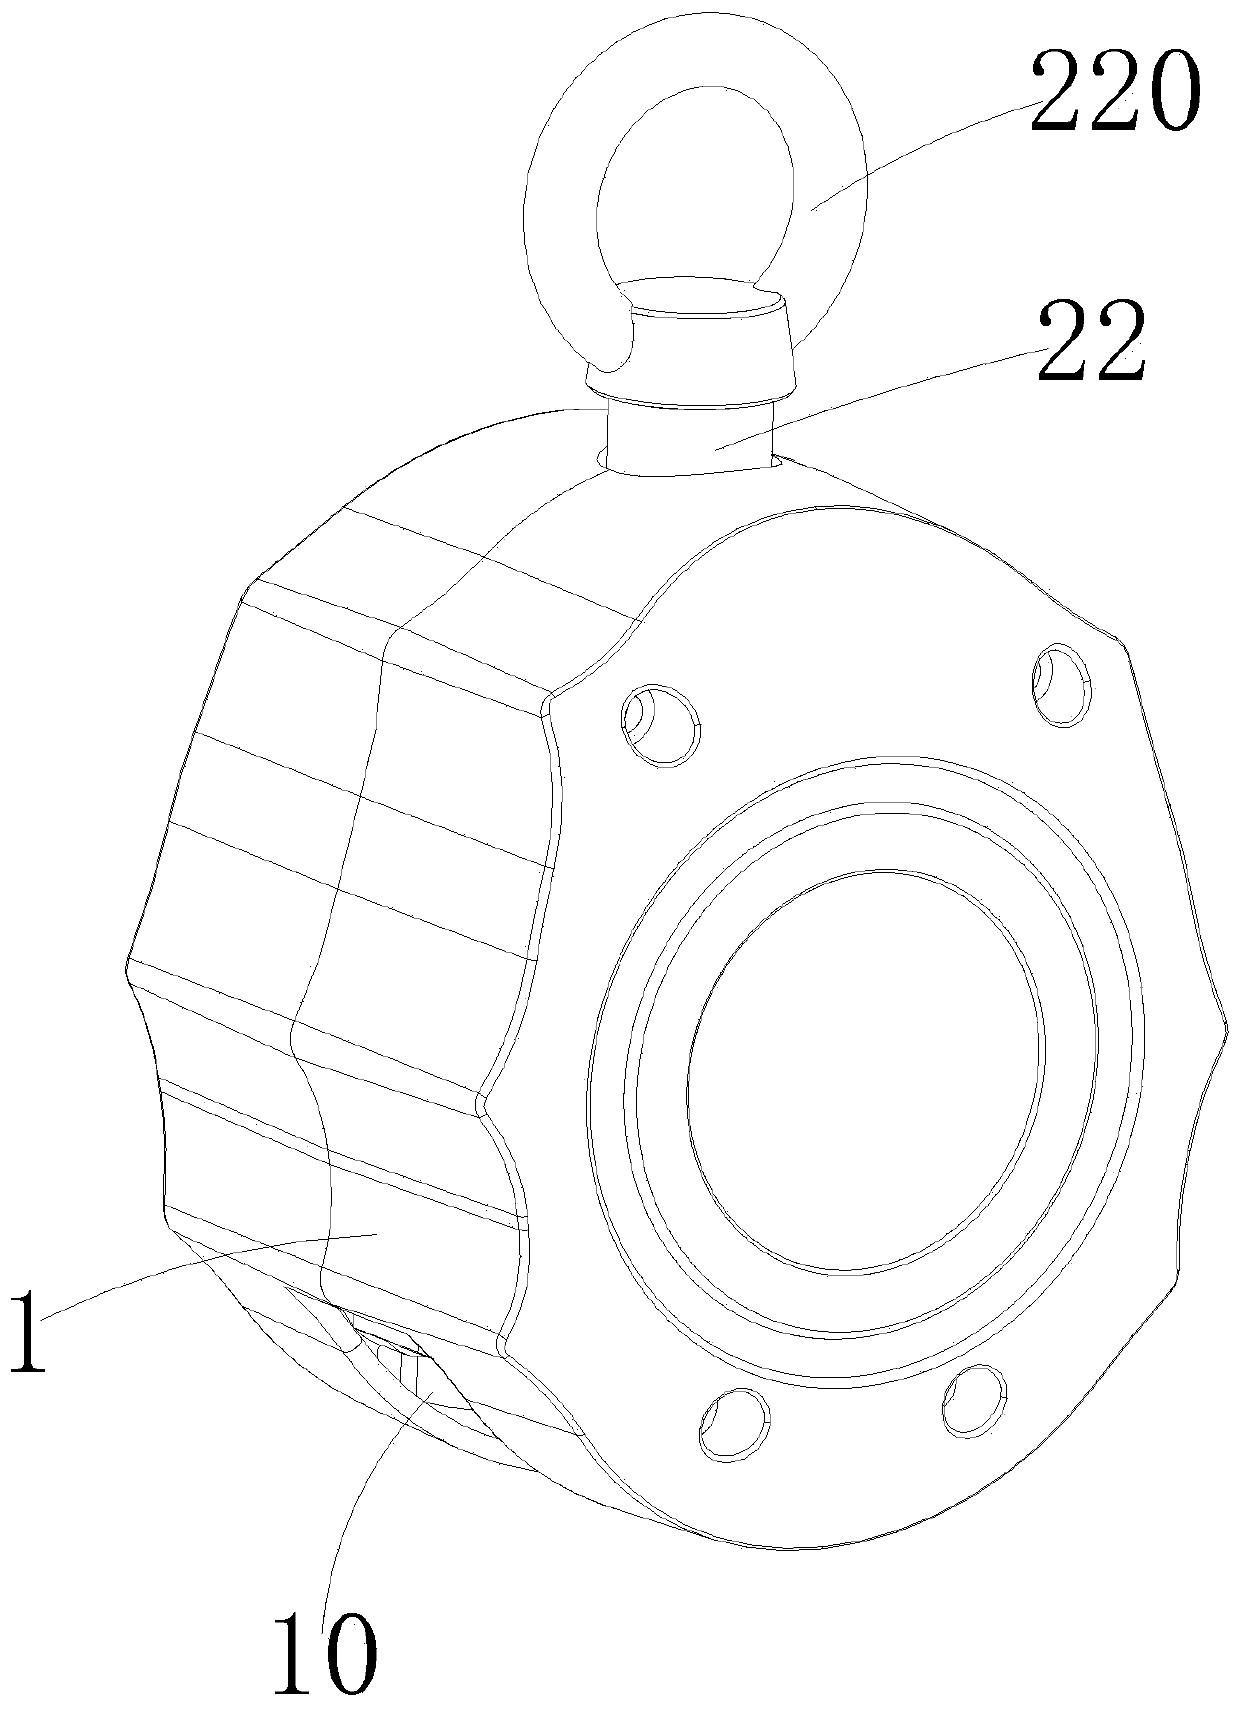 Buffer type differential anti-falling device